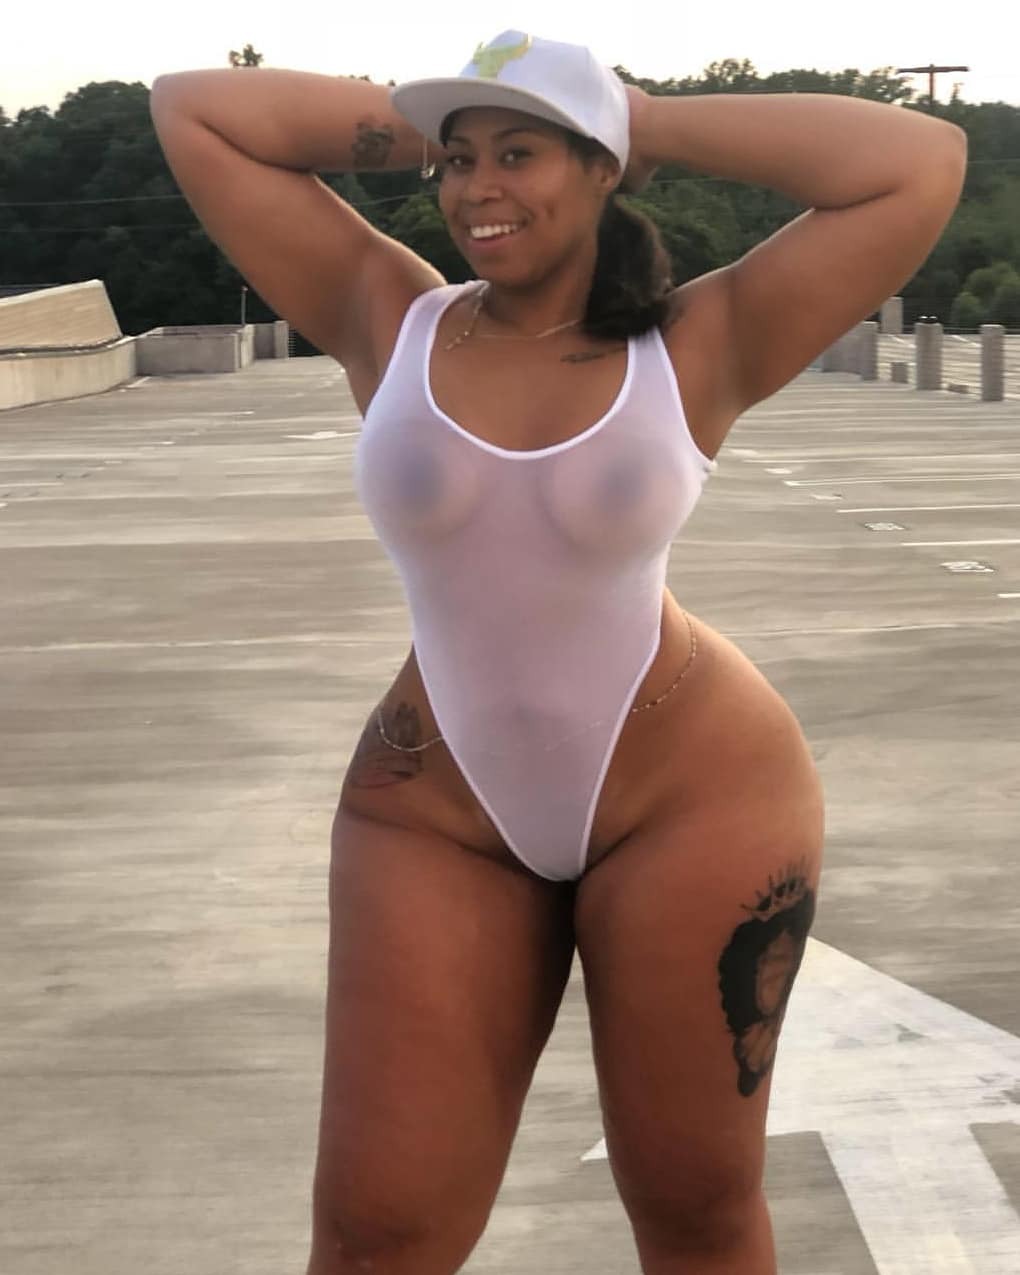 goood-thickness:  She can get it